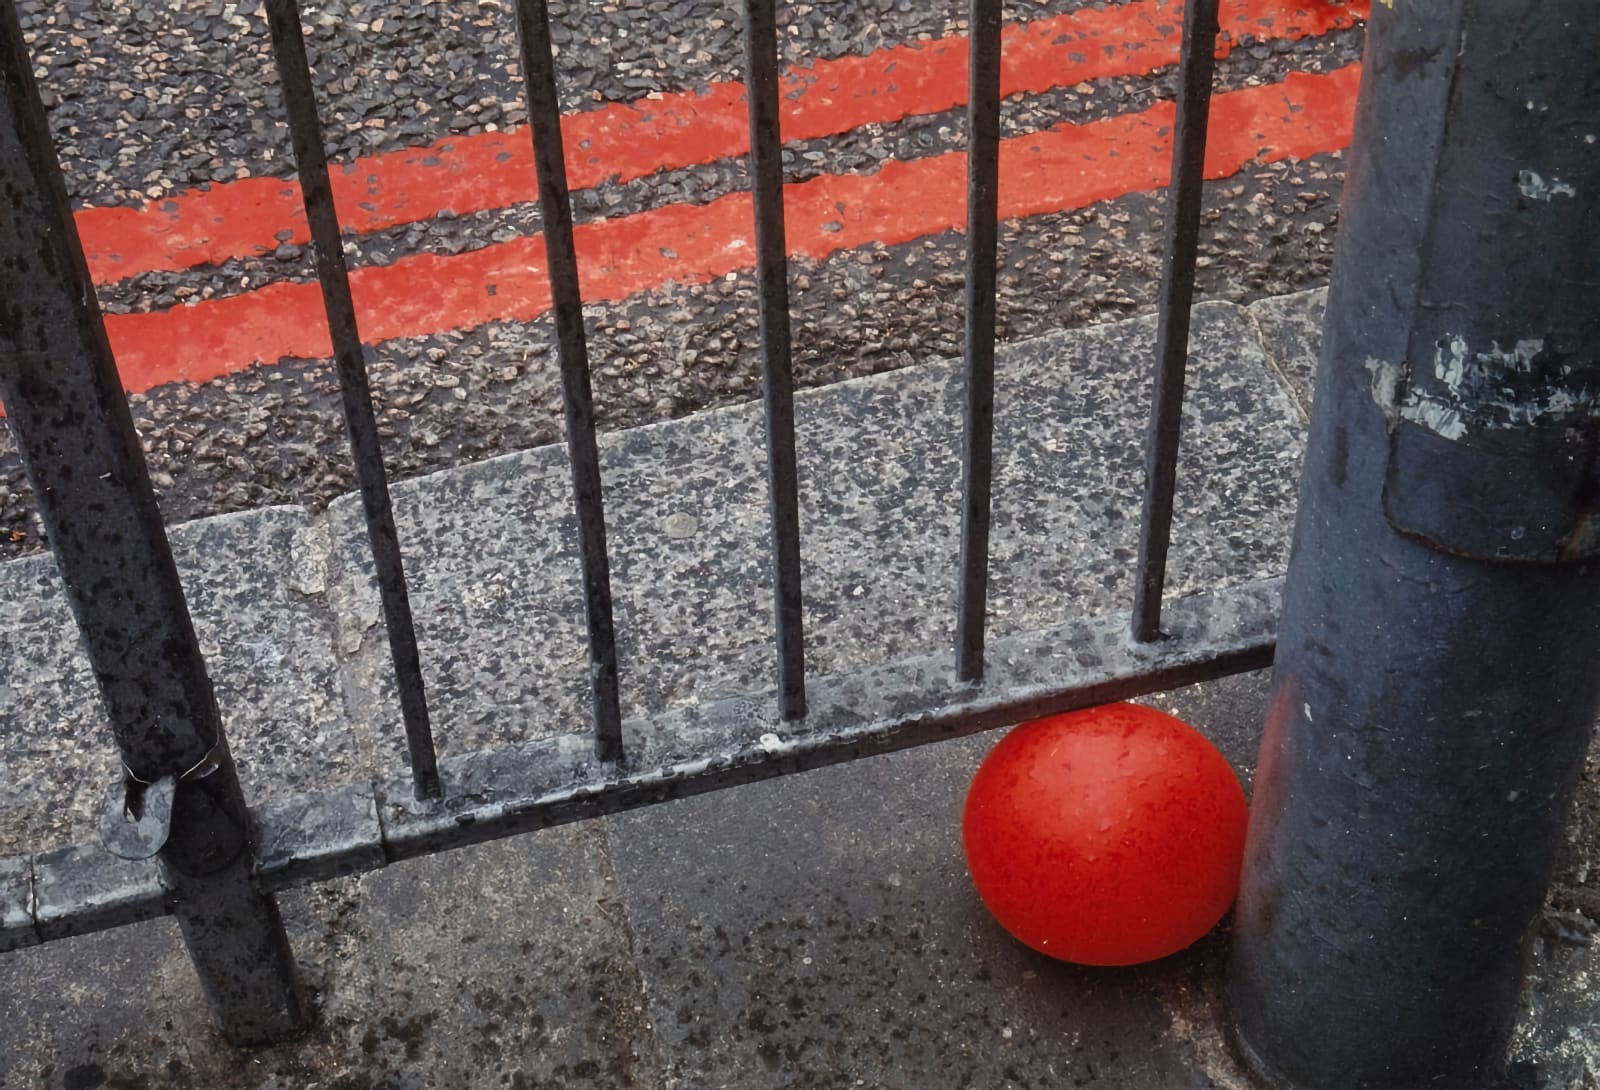 The Red Ball, best photographs on Flickr by Tim Baker